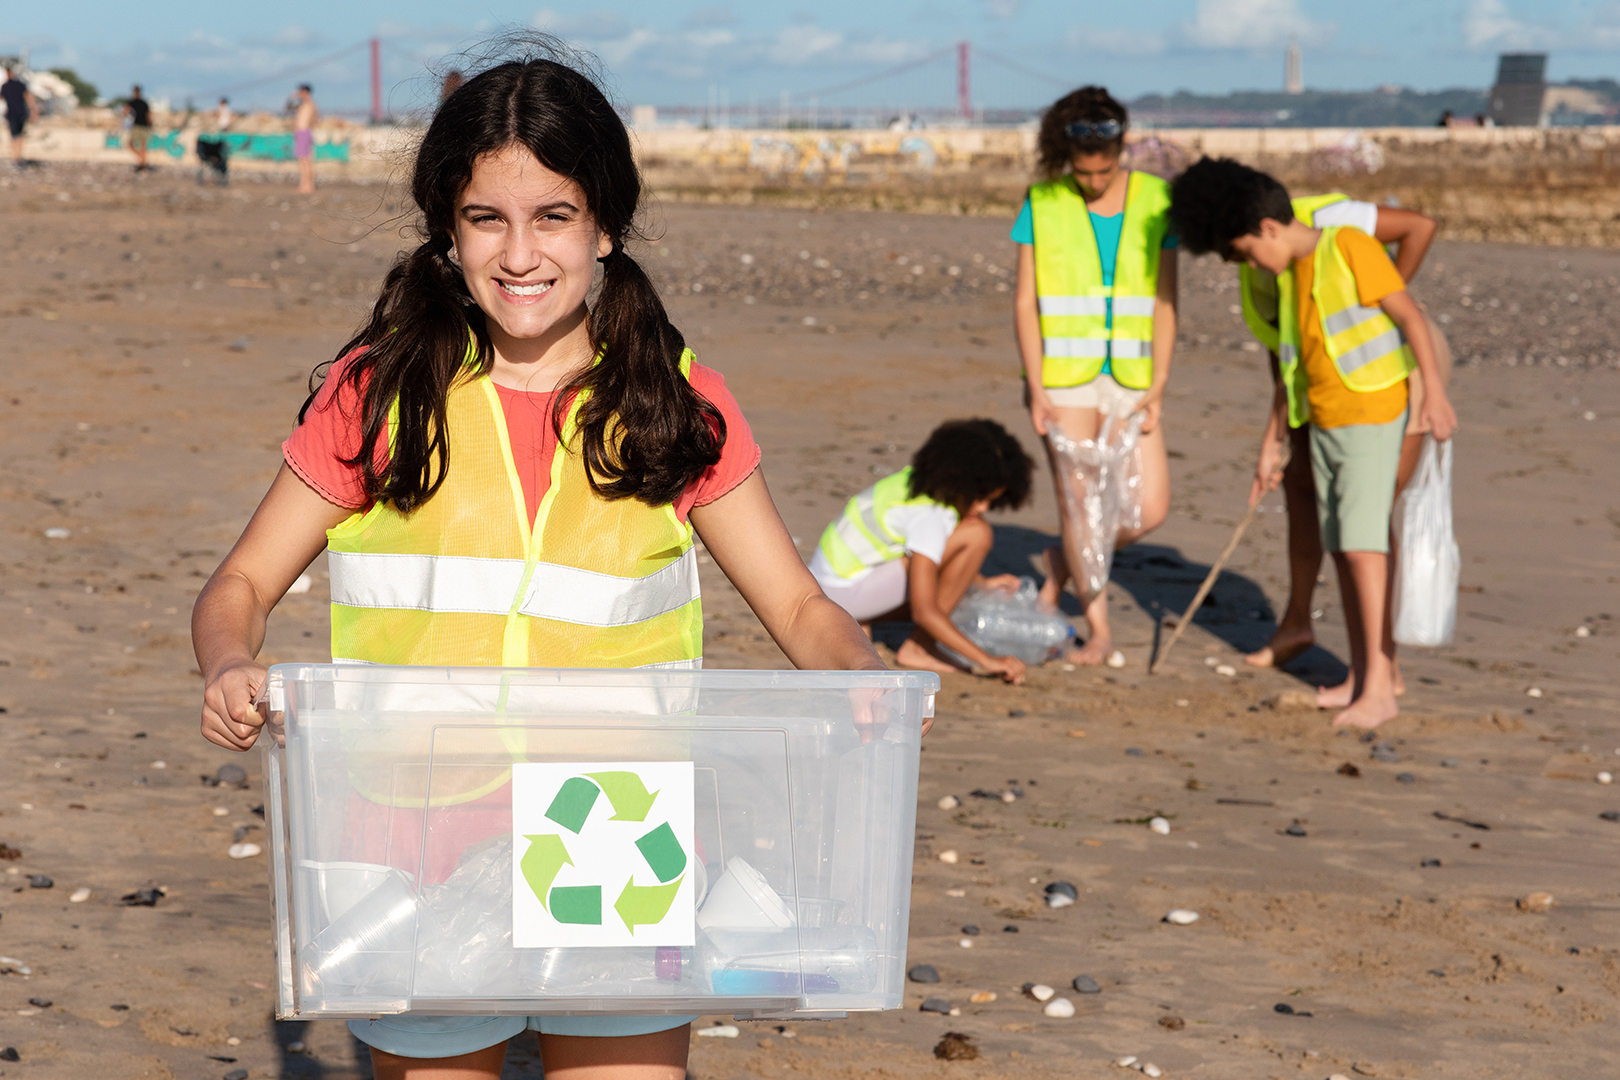 Smiling teen arab girl carries box for recycling, multiethnic children volunteers in vests collect garbage